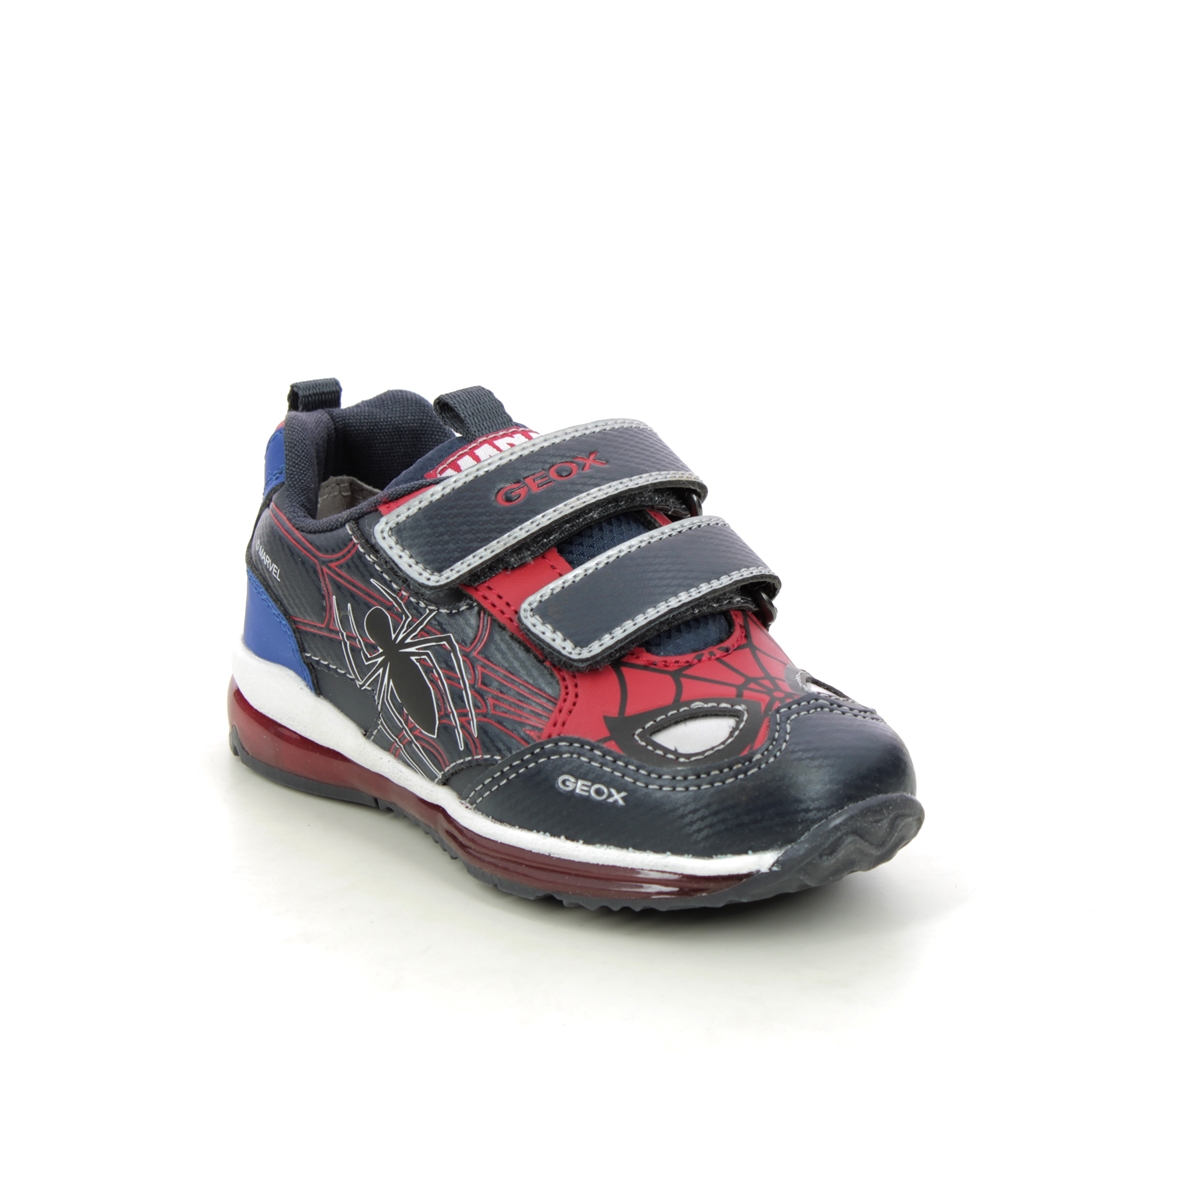 Geox Todo Spiderman Navy Red Kids trainers B2684A-C0735 in a Plain Man-made in Size 27